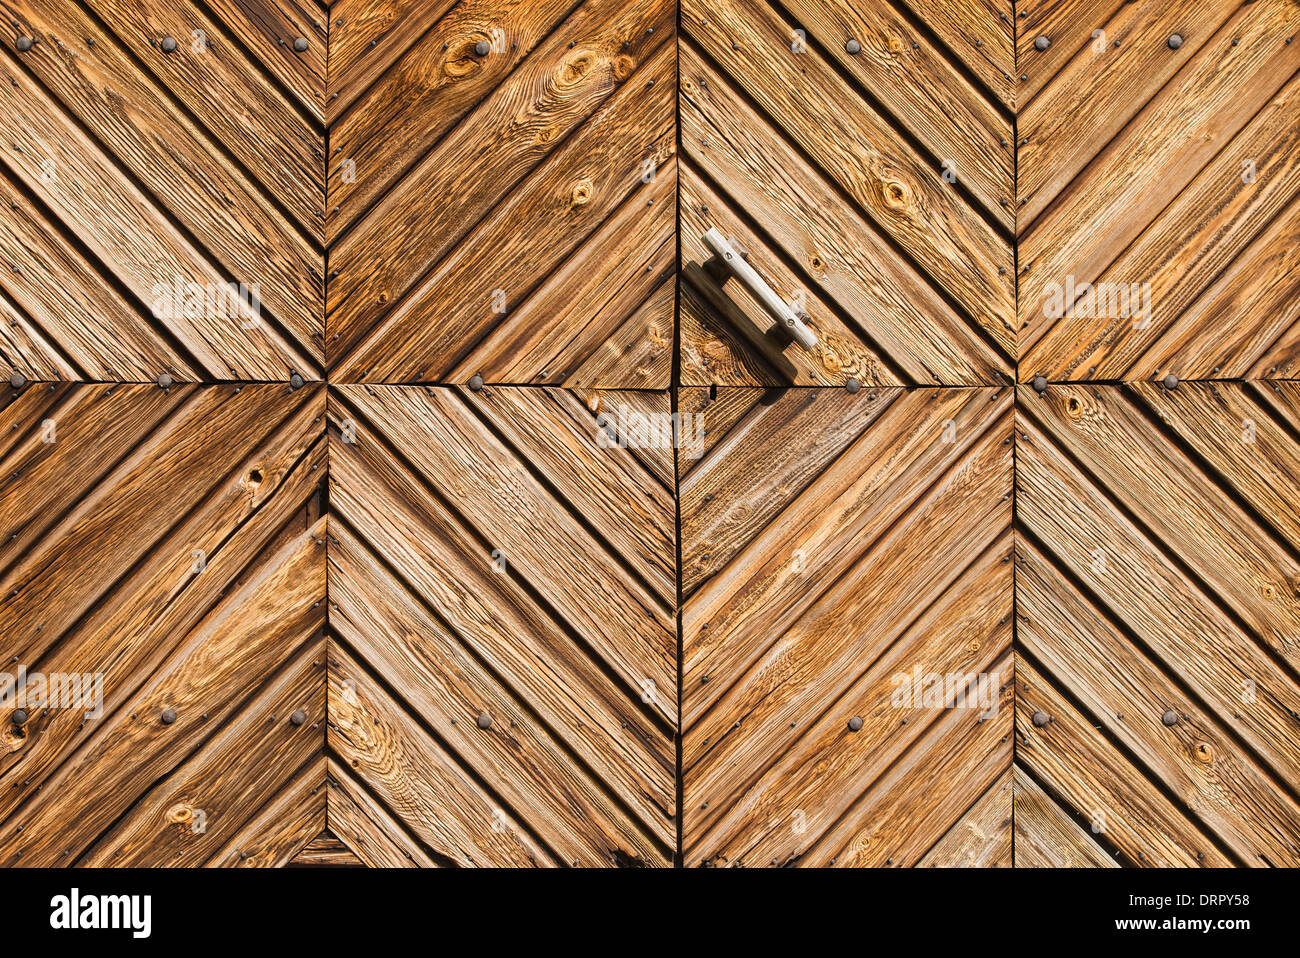 Entrance of old building with large wooden door, Sweden Stock Photo